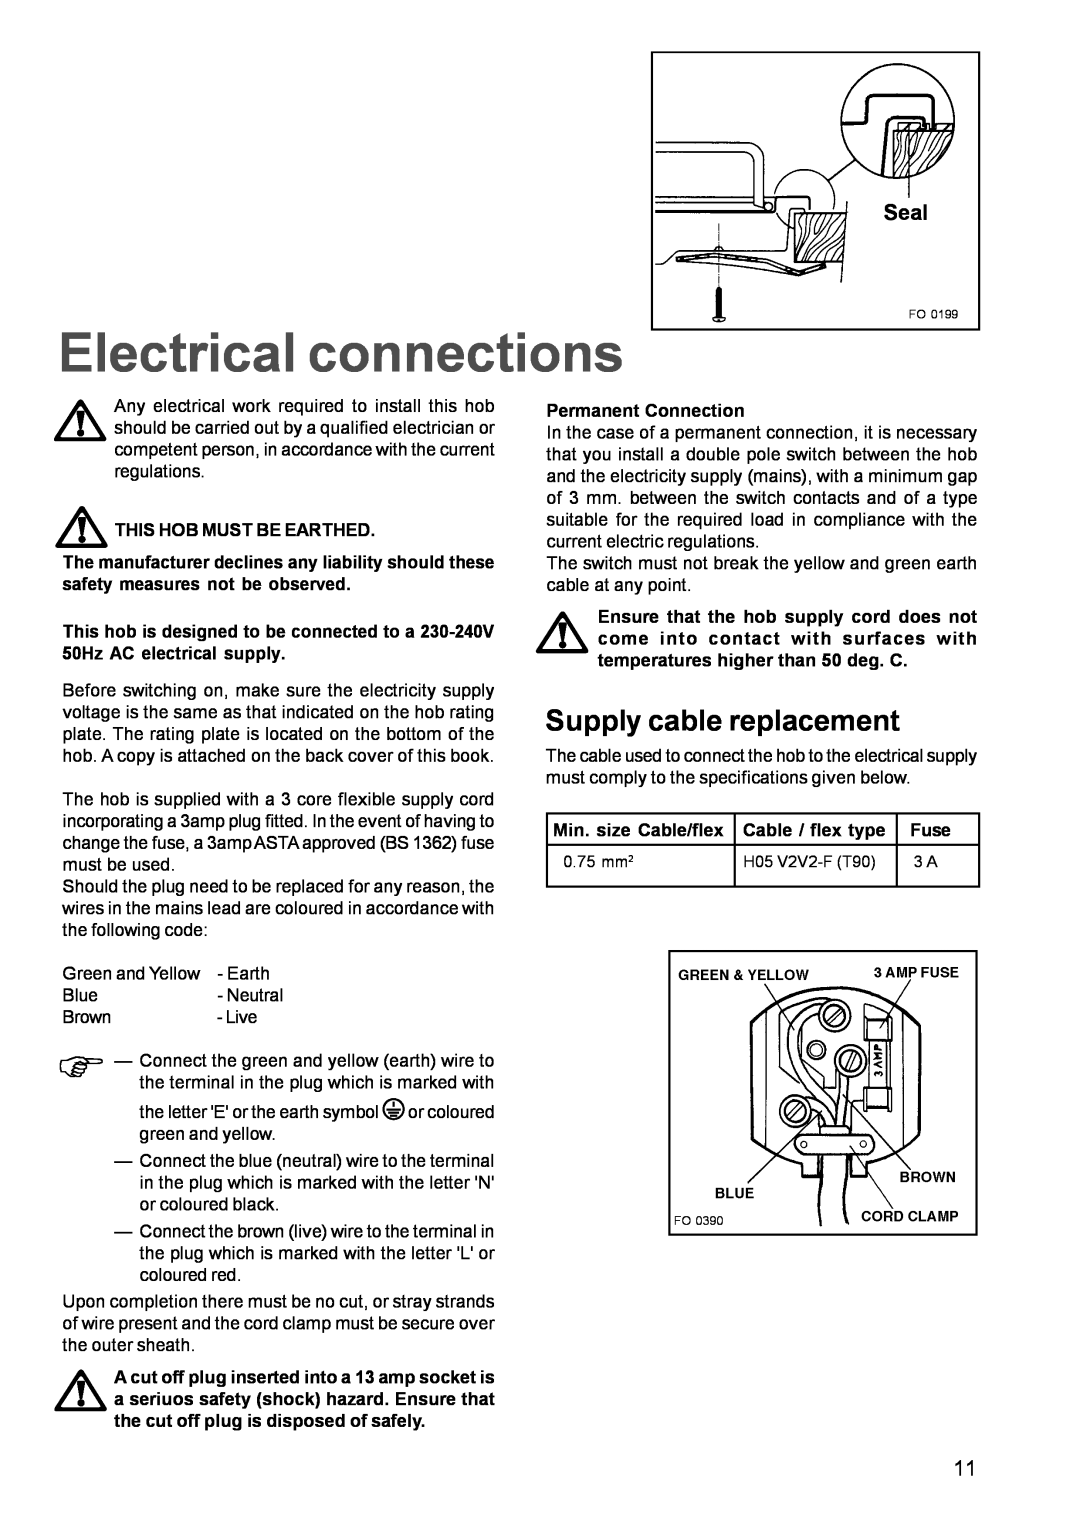 Zanussi ZGF782C manual Electrical connections, Supply cable replacement, Seal 